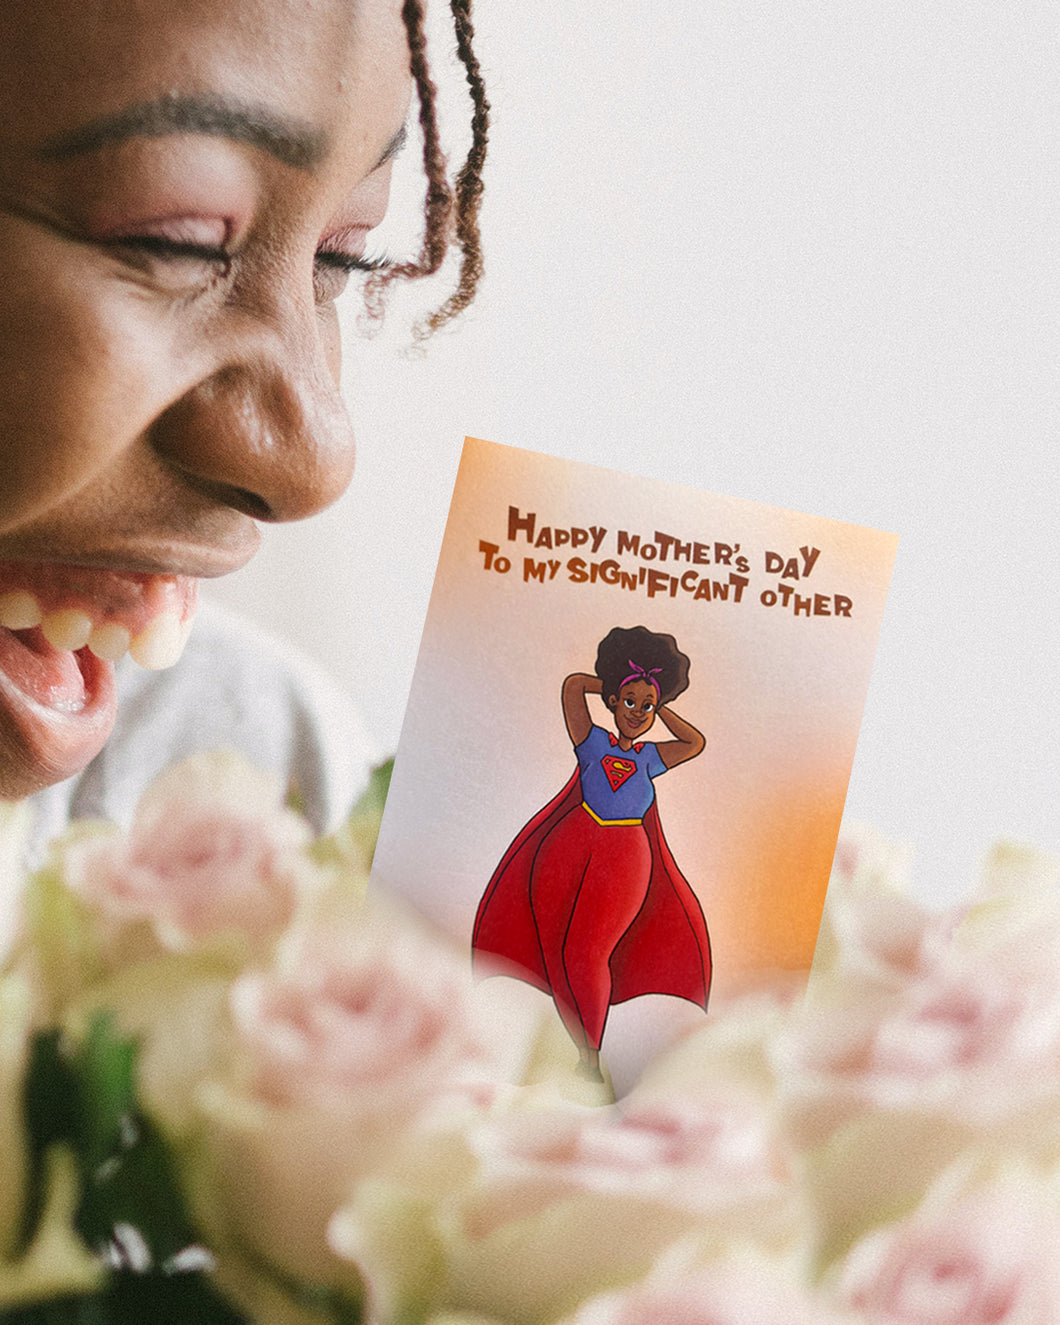 A Mother's Day card - To My Significant Other